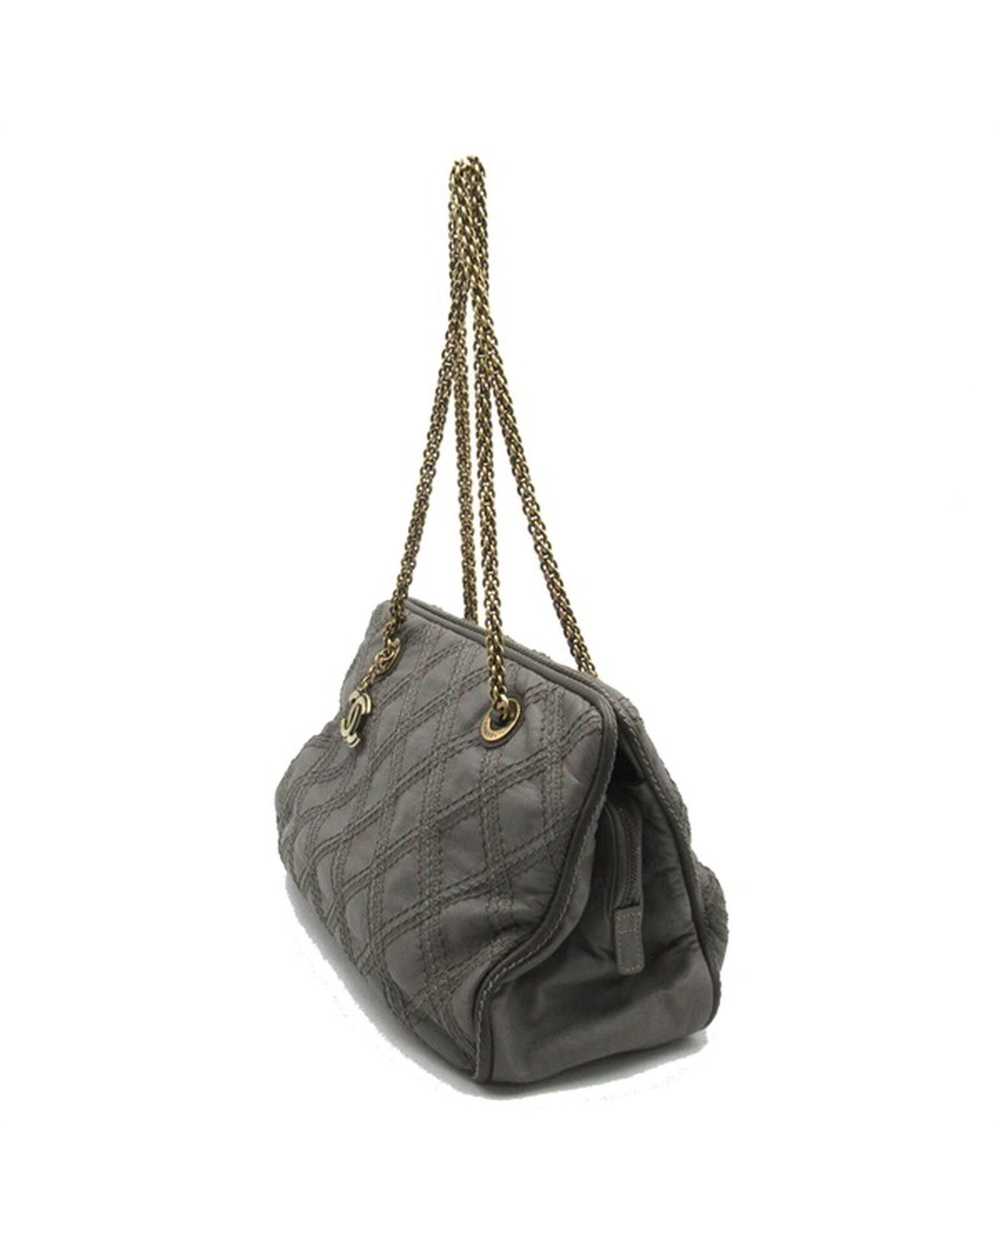 Chanel Quilted Leather Triptych Tote Bag - Grey - image 4